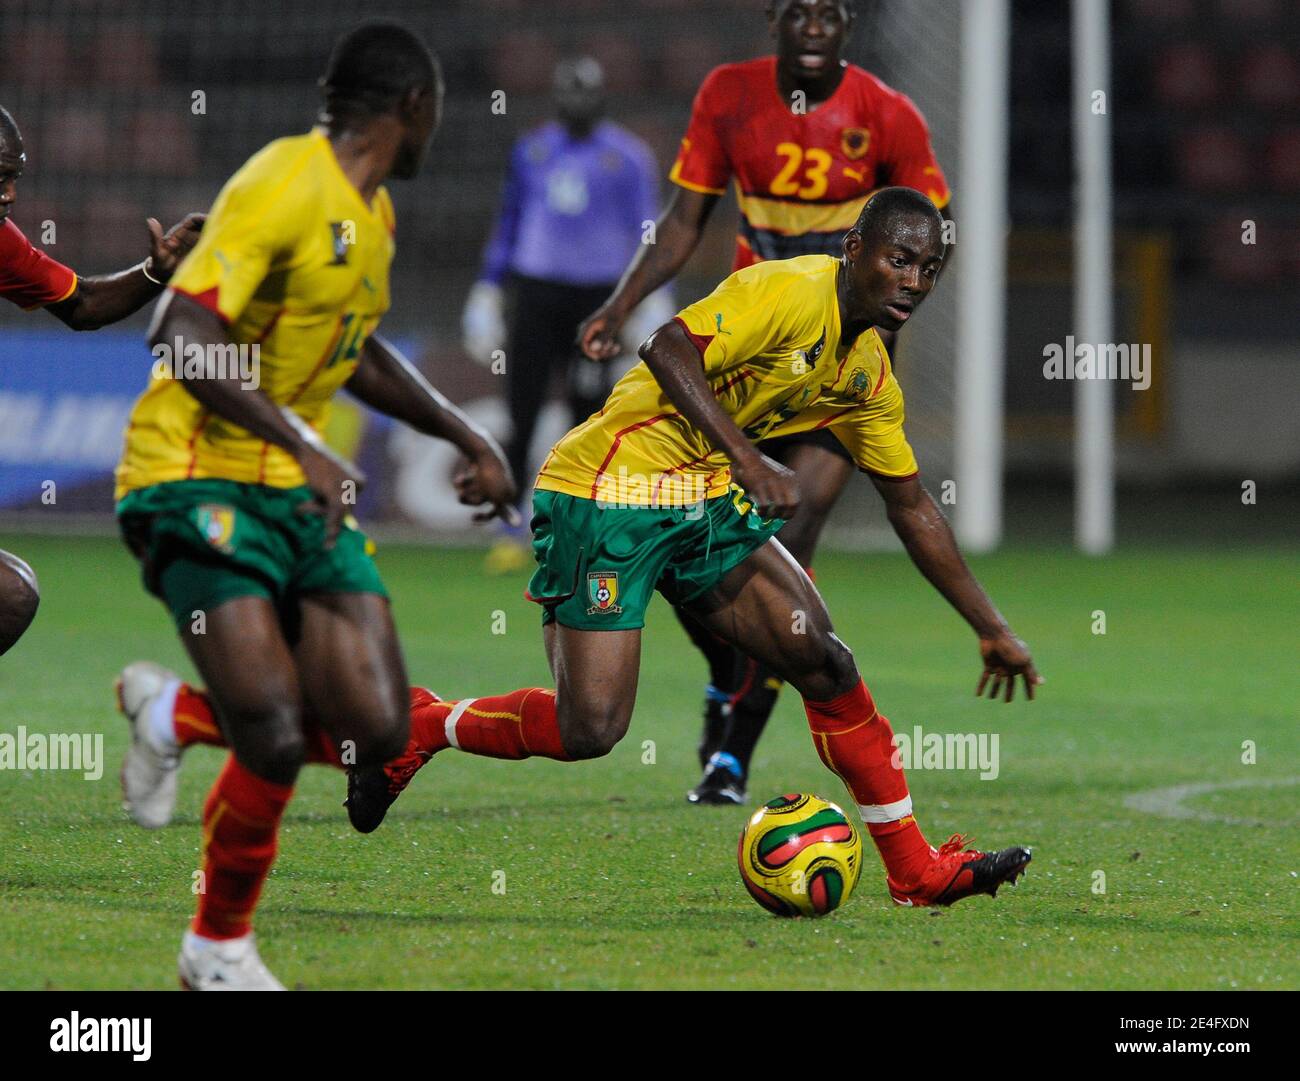 Cameroon's Enoh Eyong during a Friendly soccer Match, Cameroon vs Angola in Olhao, Portugal on October 14, 2009. The match ended in a 1-1 draw. Photo by Henri Szwarc/ABACAPRESS.COM Stock Photo